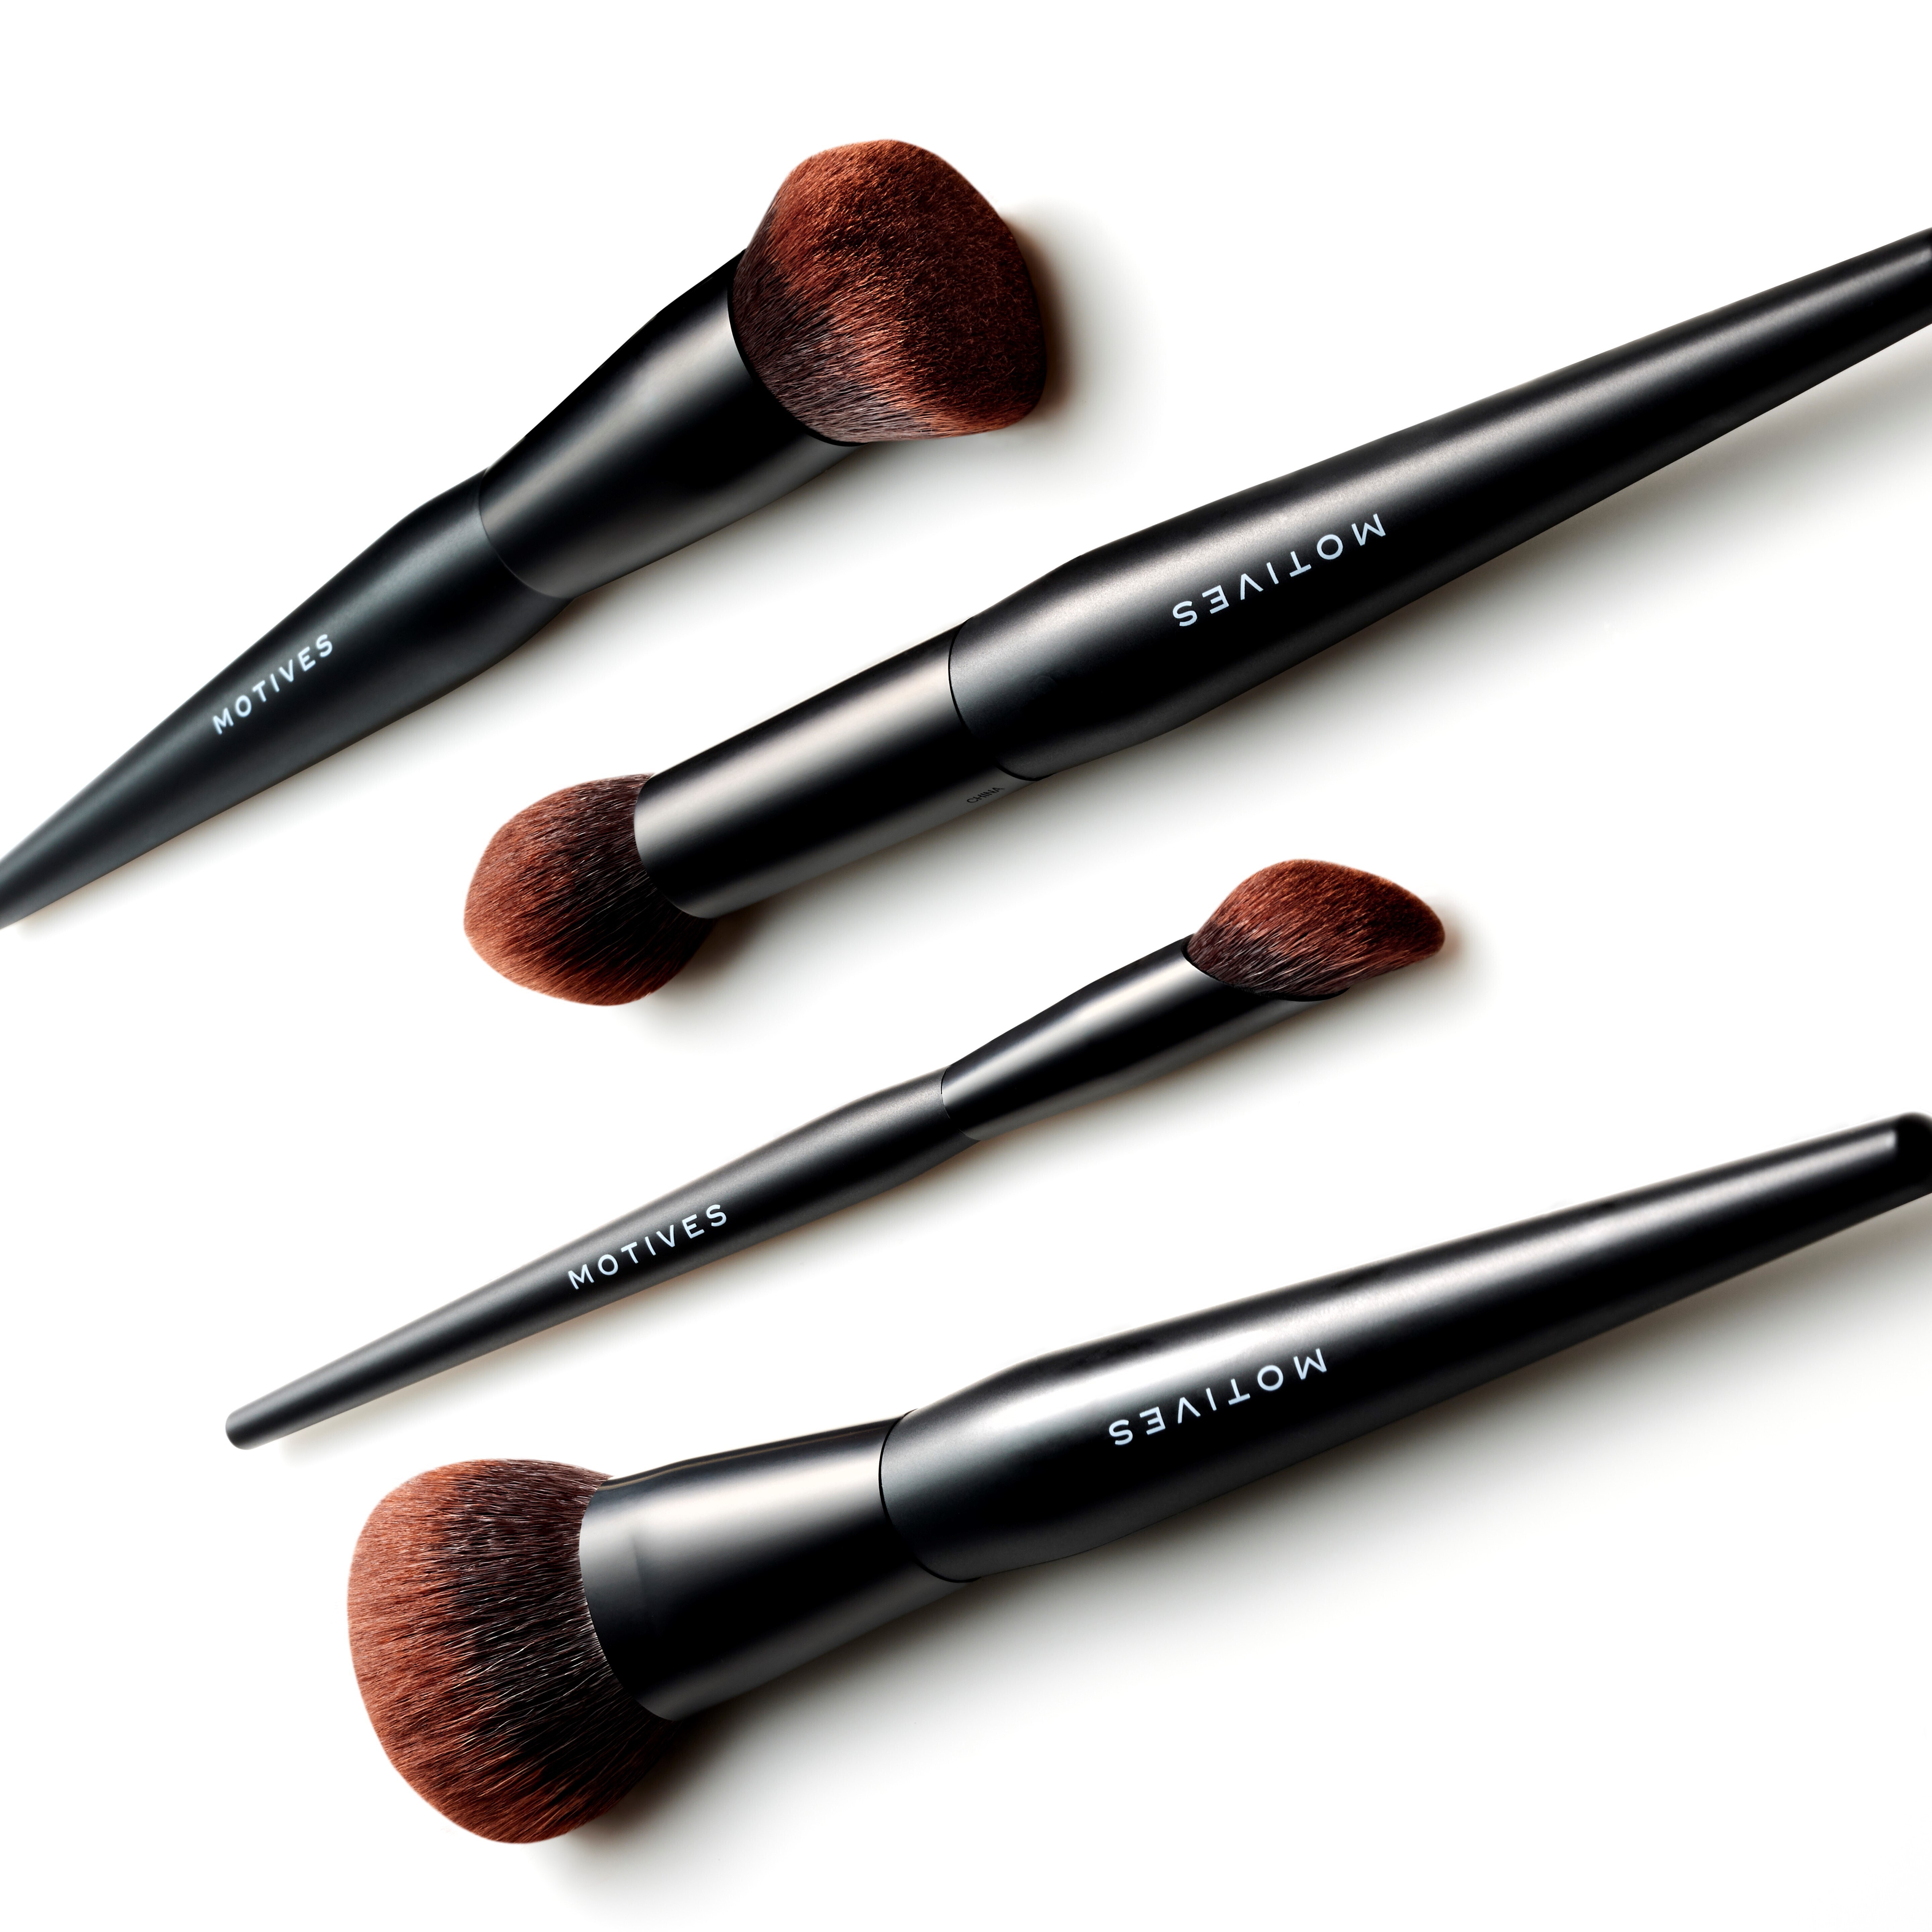 All 4 brushes from Motives Essential Complexion 4-Piece Brush Set displayed on white background.